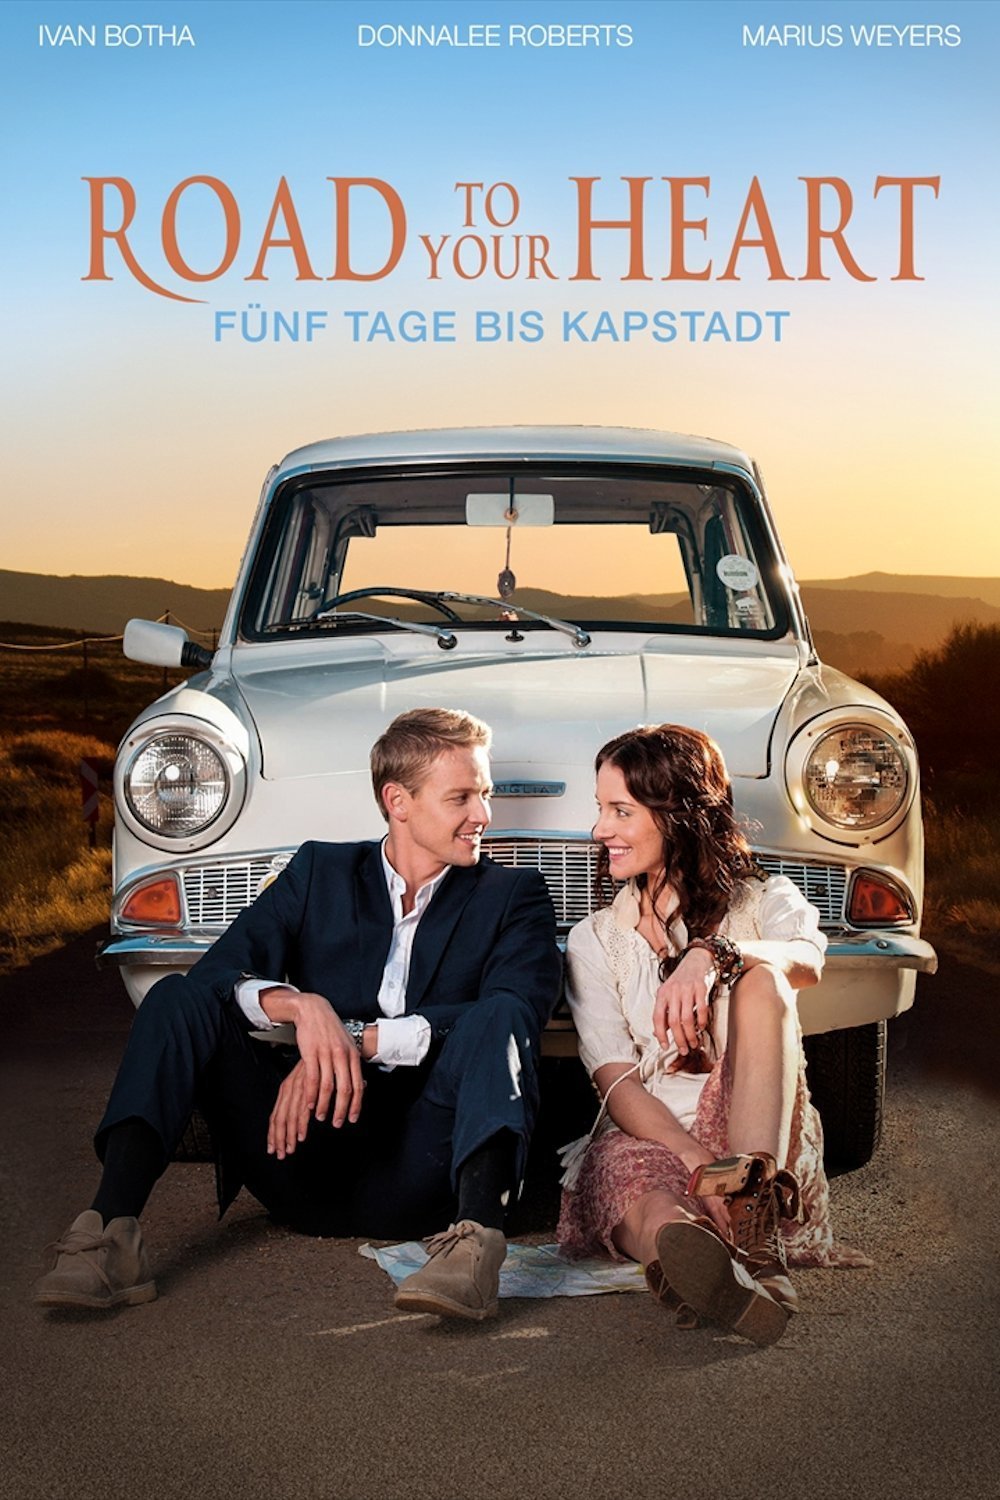 Poster for the movie "Road to Your Heart"